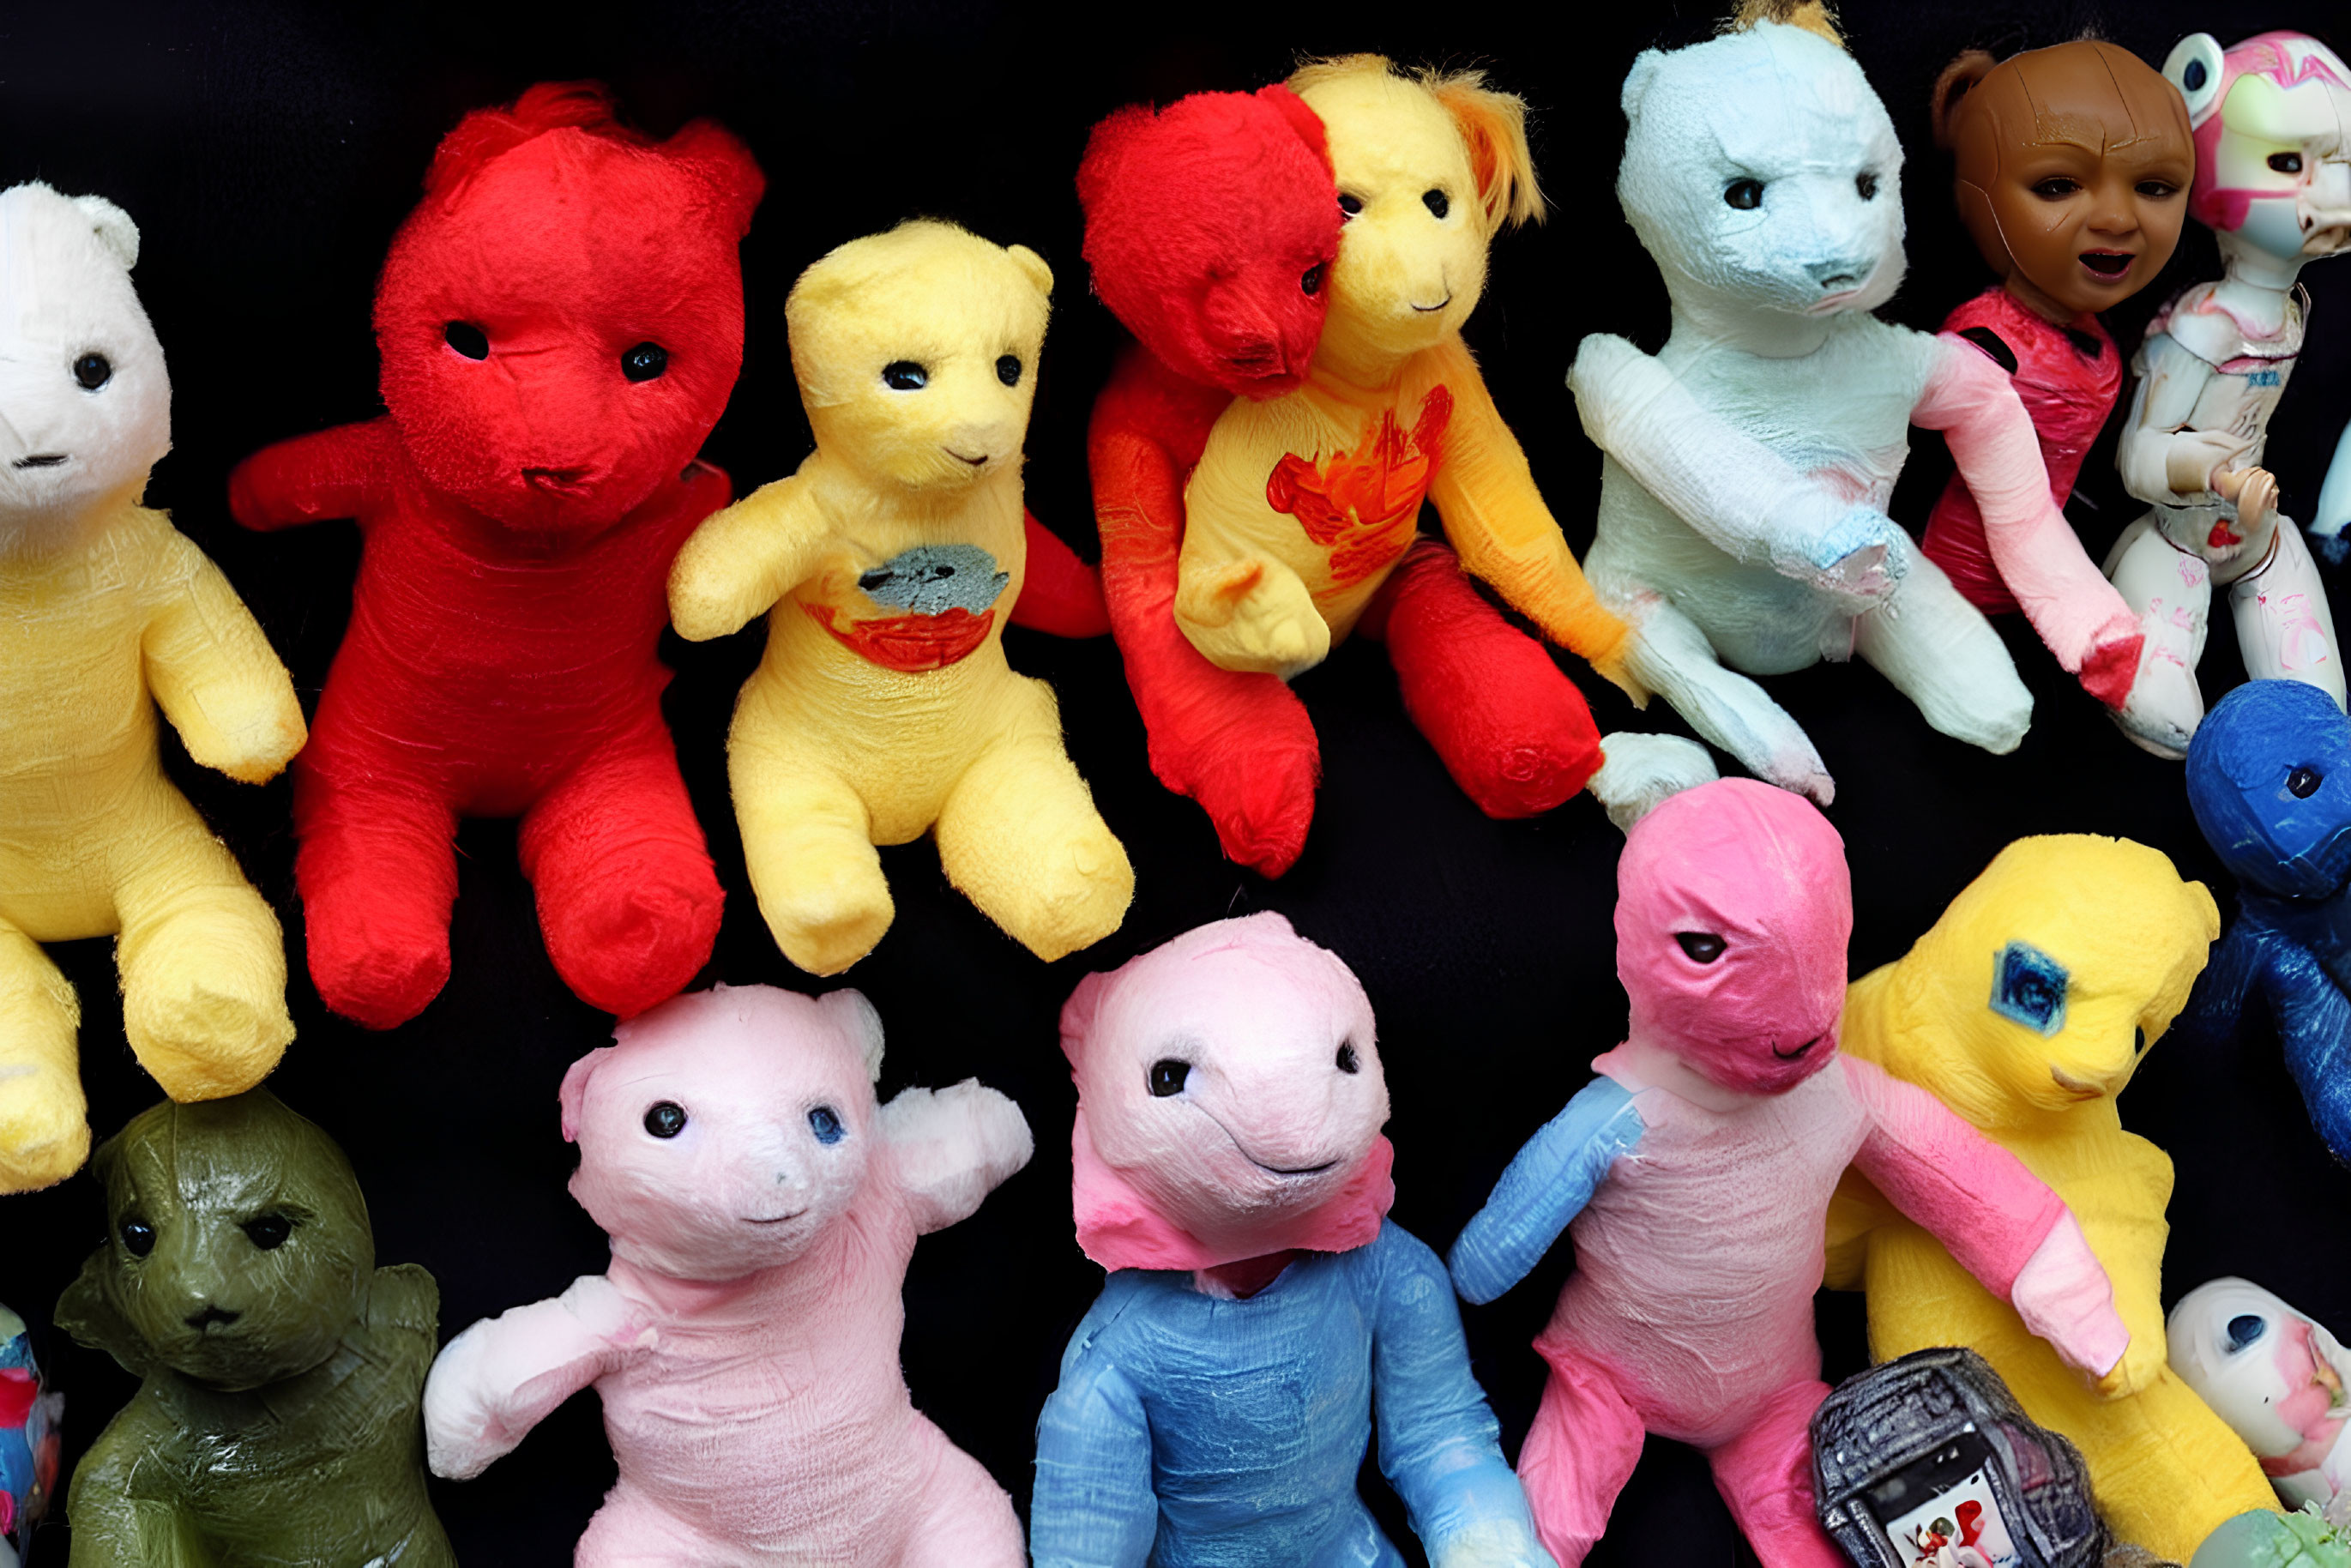 Variety of Colorful Stuffed Animals and Dolls on Black Background